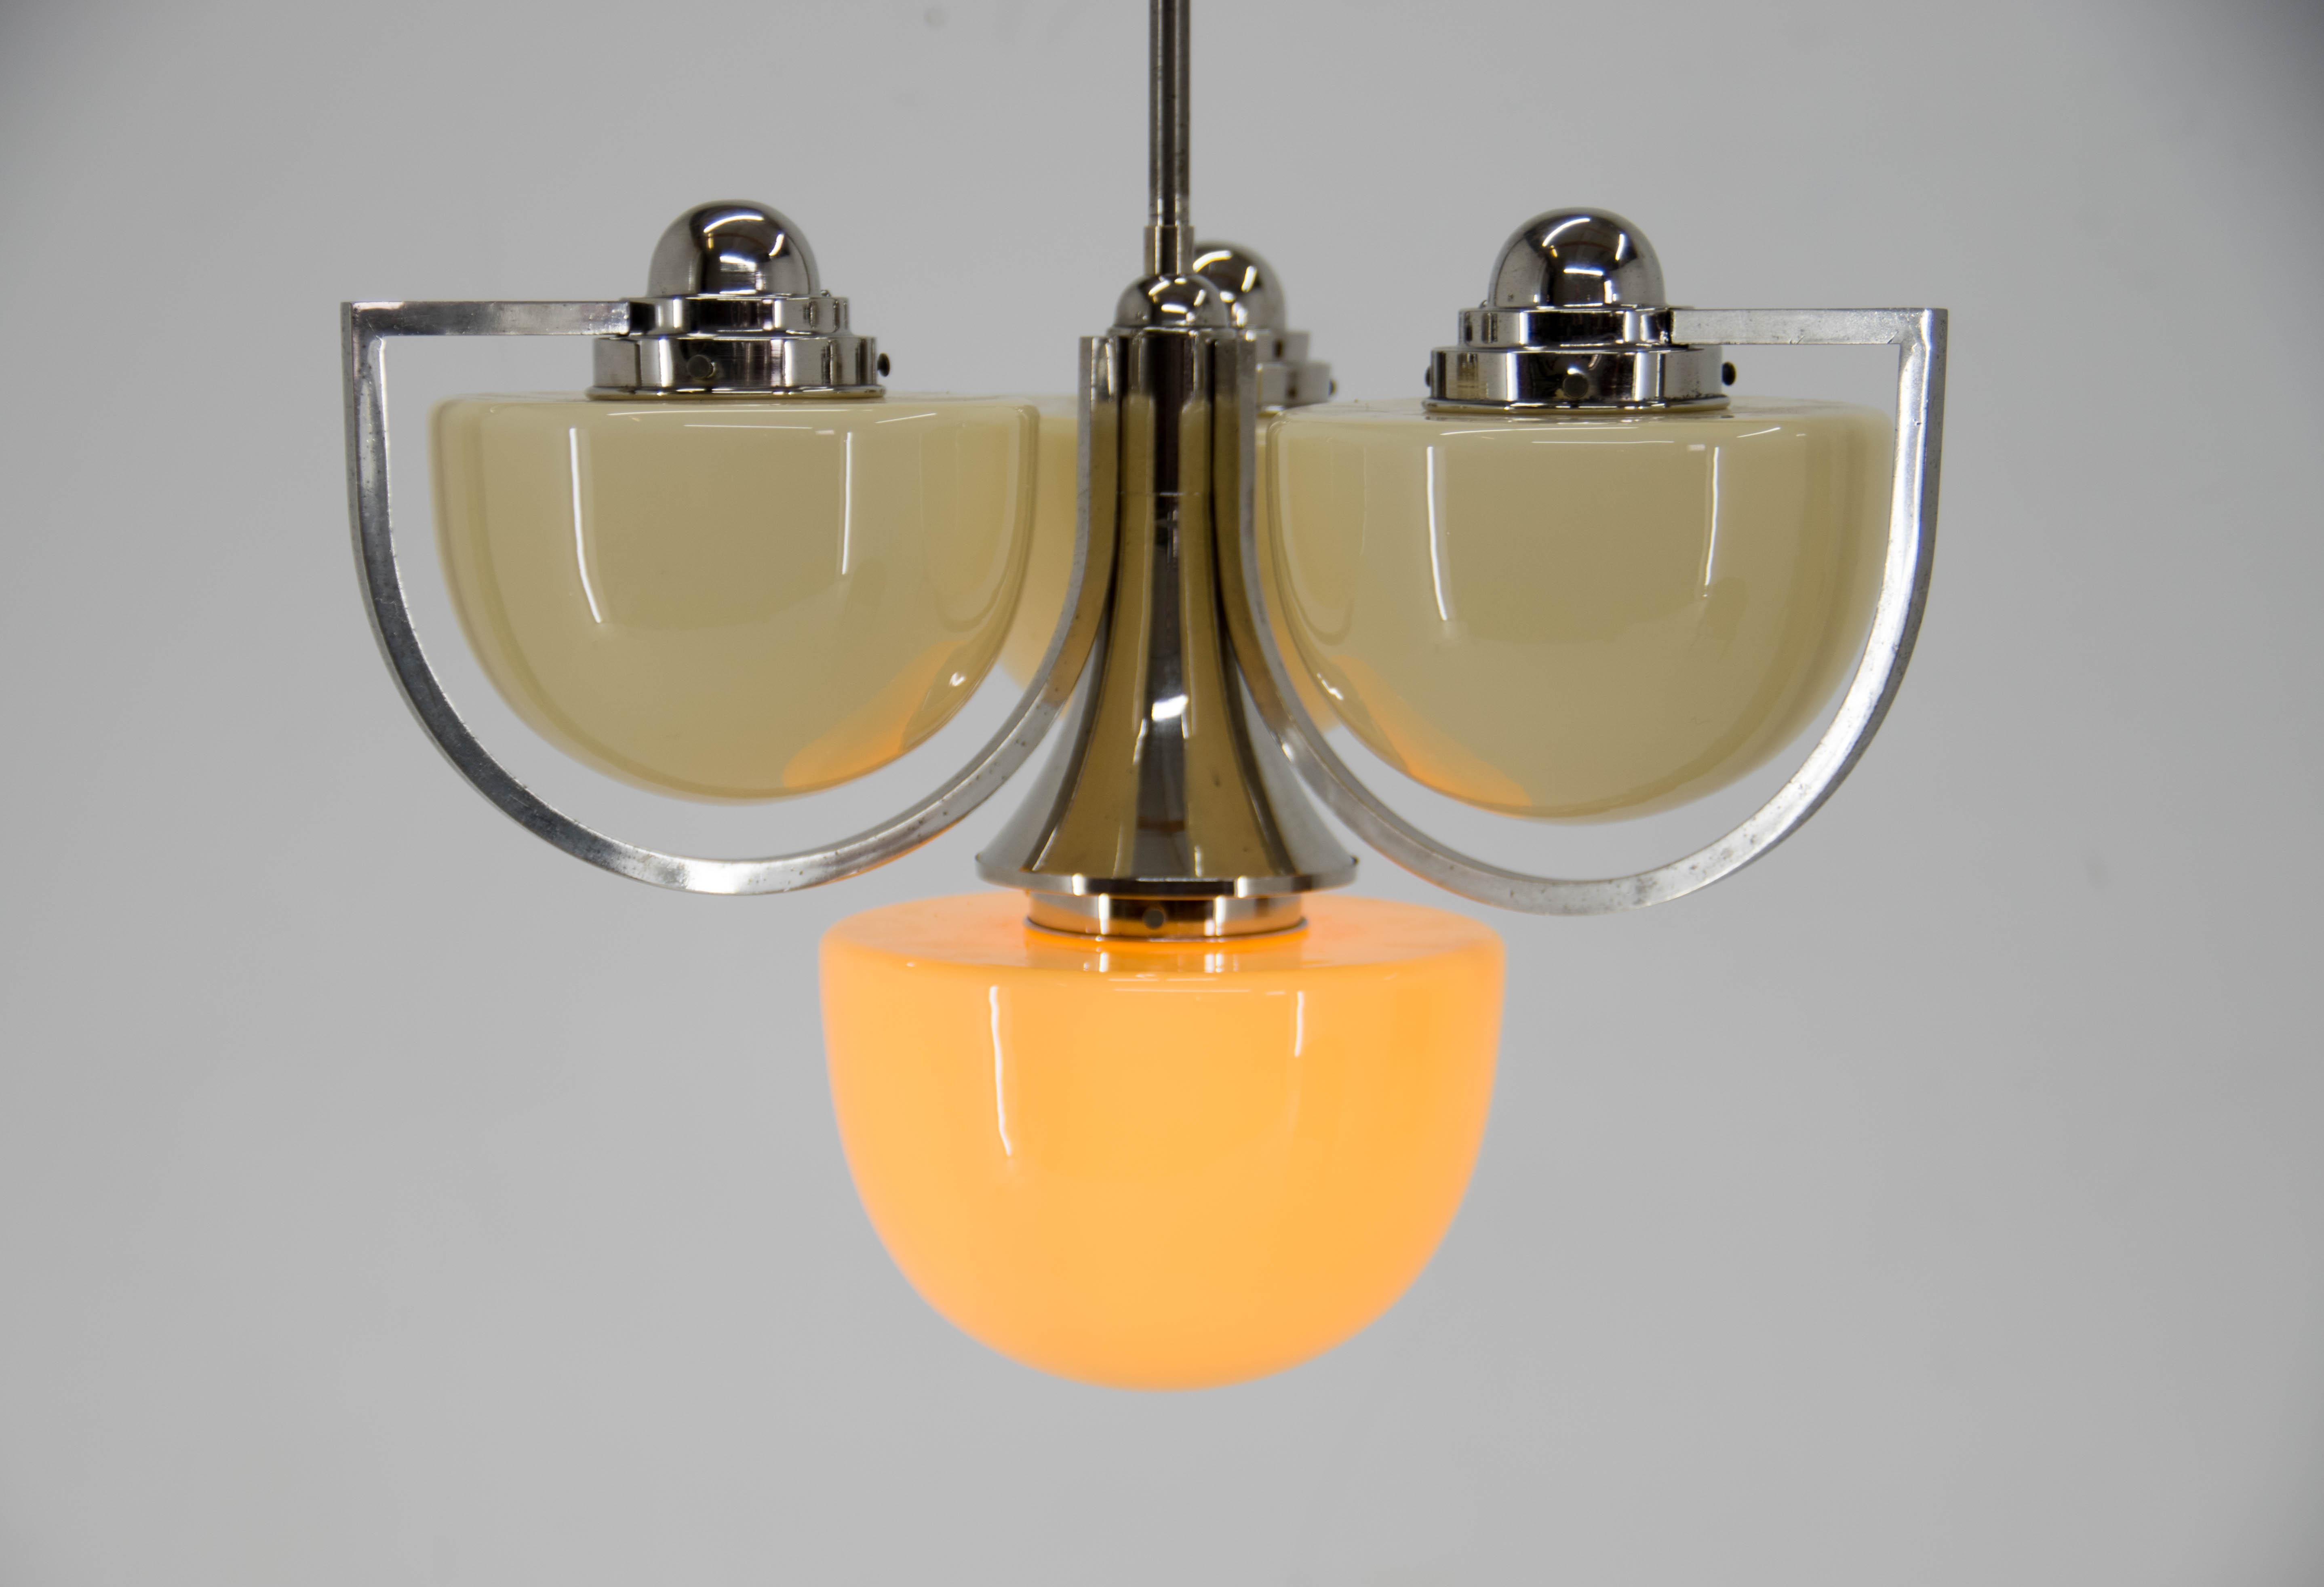 Beautiful unique Art Deco chandelier. Unusual shape of glass shades requires special way of flexible sockets - visible on photo with rotating socket.
Central rod could be shortened on request.
Completely restored: nickel with minor age patina